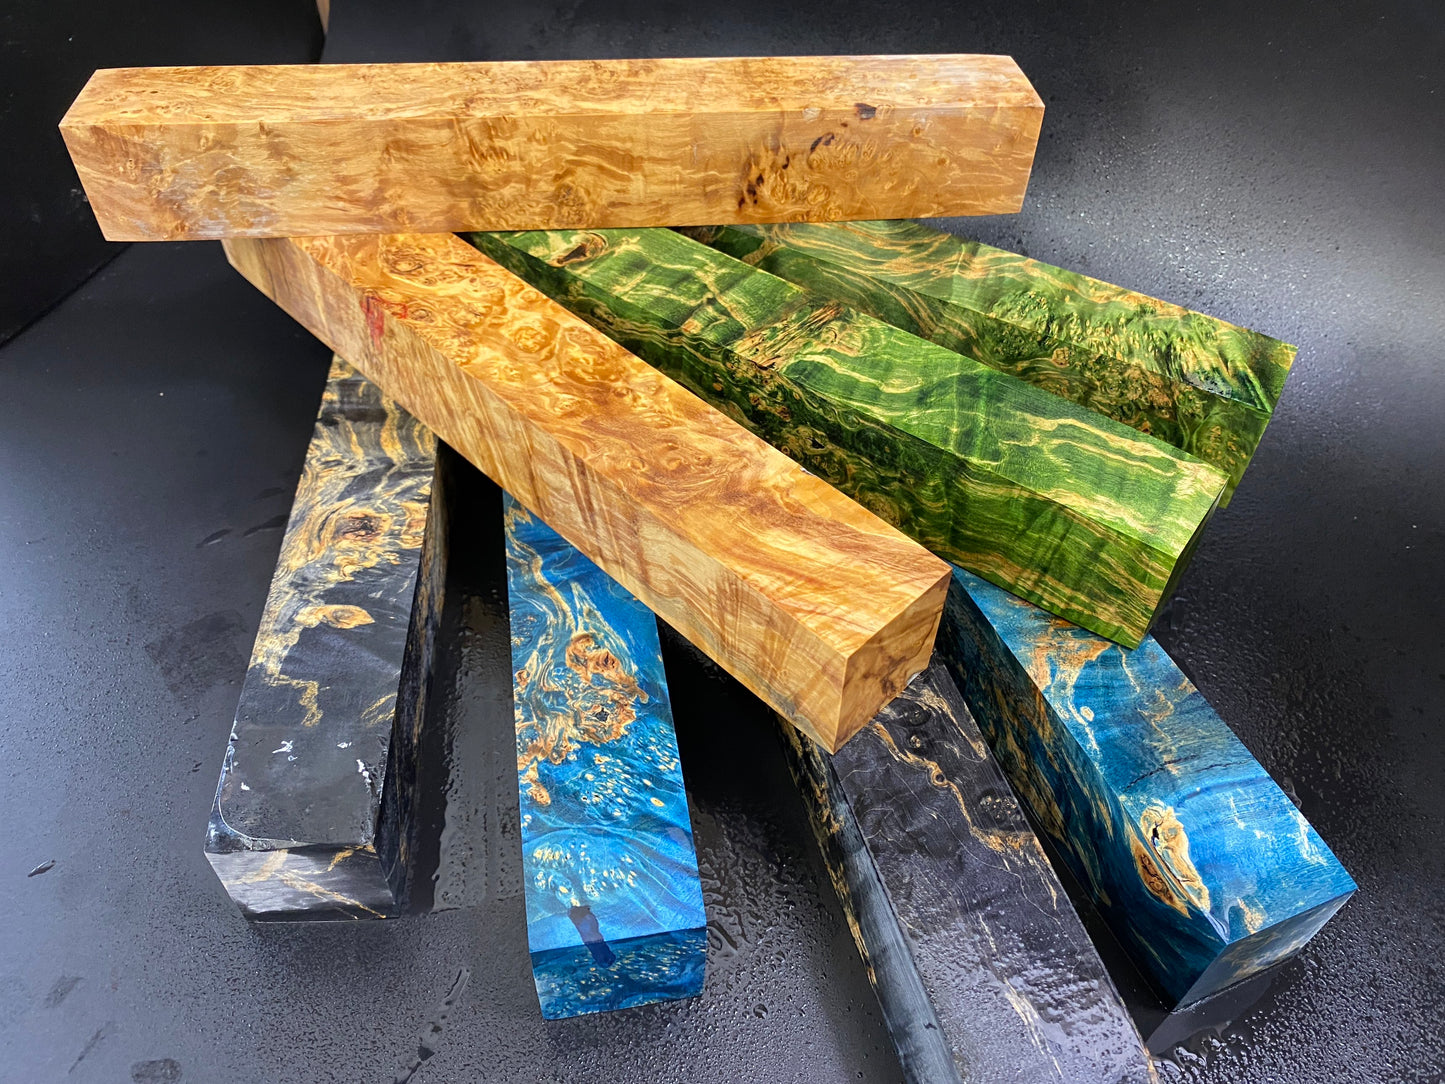 MAPLE BURL Stabilized Wood, Long Sizes Premium Blanks for Woodworking. France Stock.